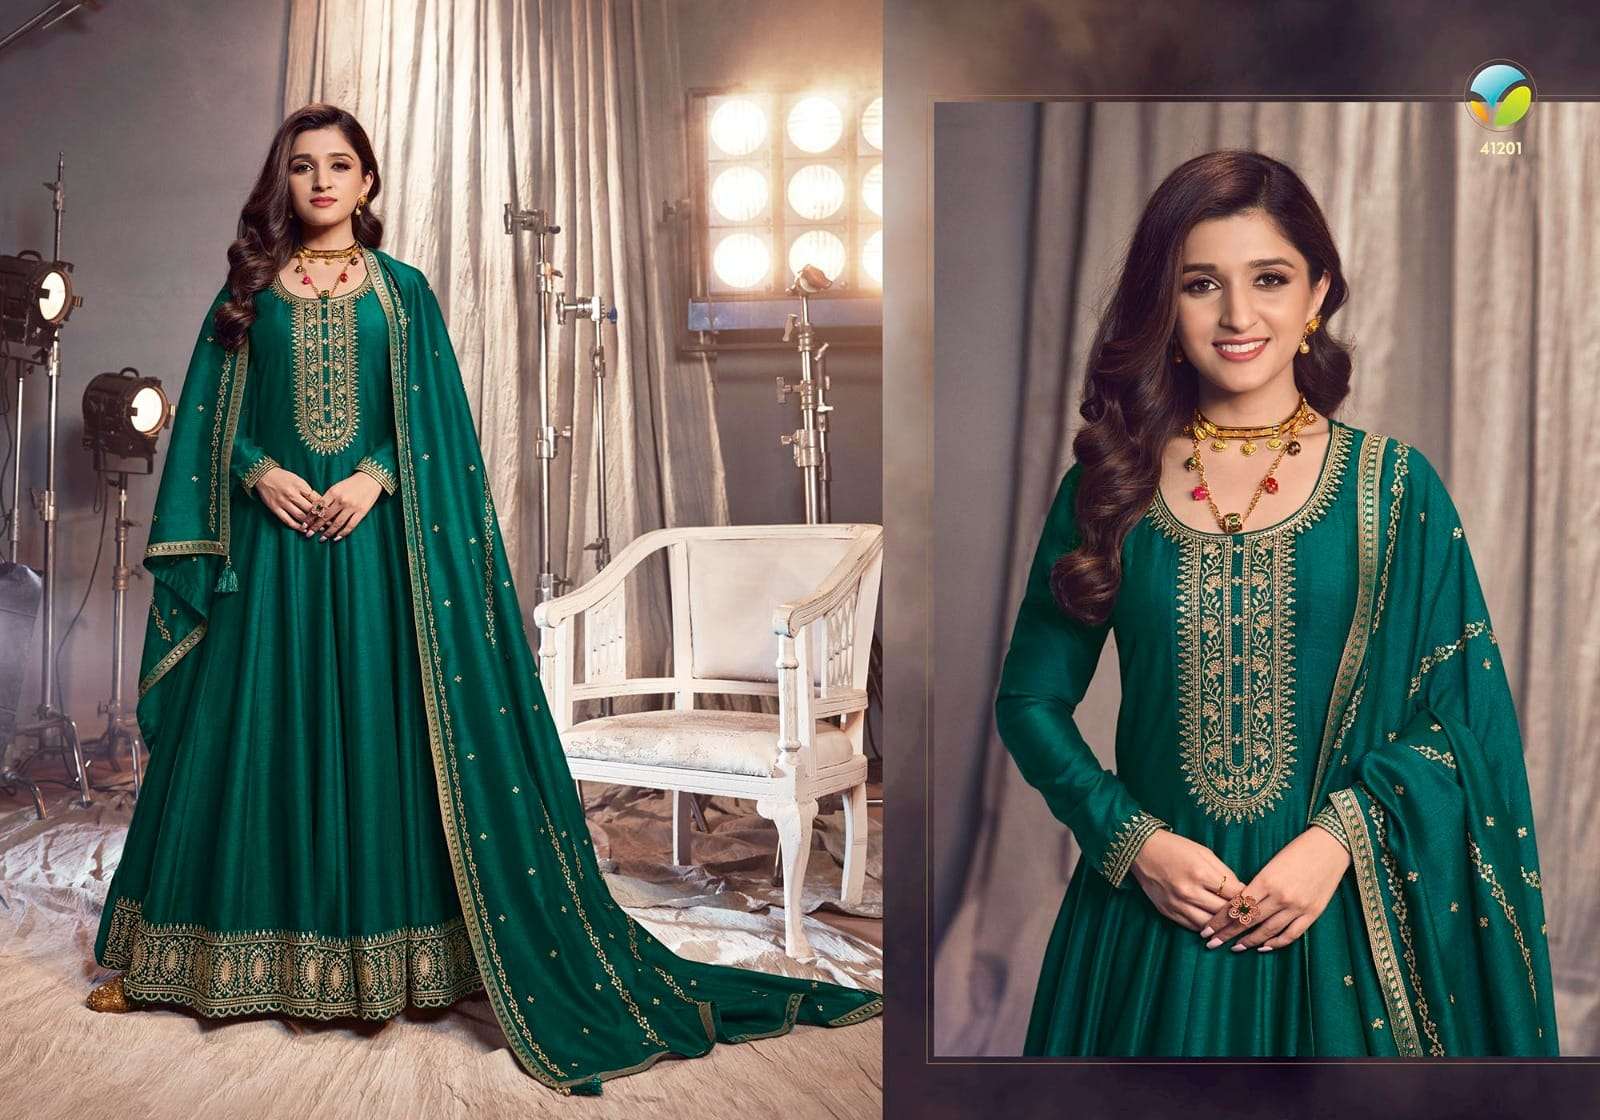 tumbaa apsara by vinay fashion 41201 to 41206 series georgette silk embroidered gown n duppta 